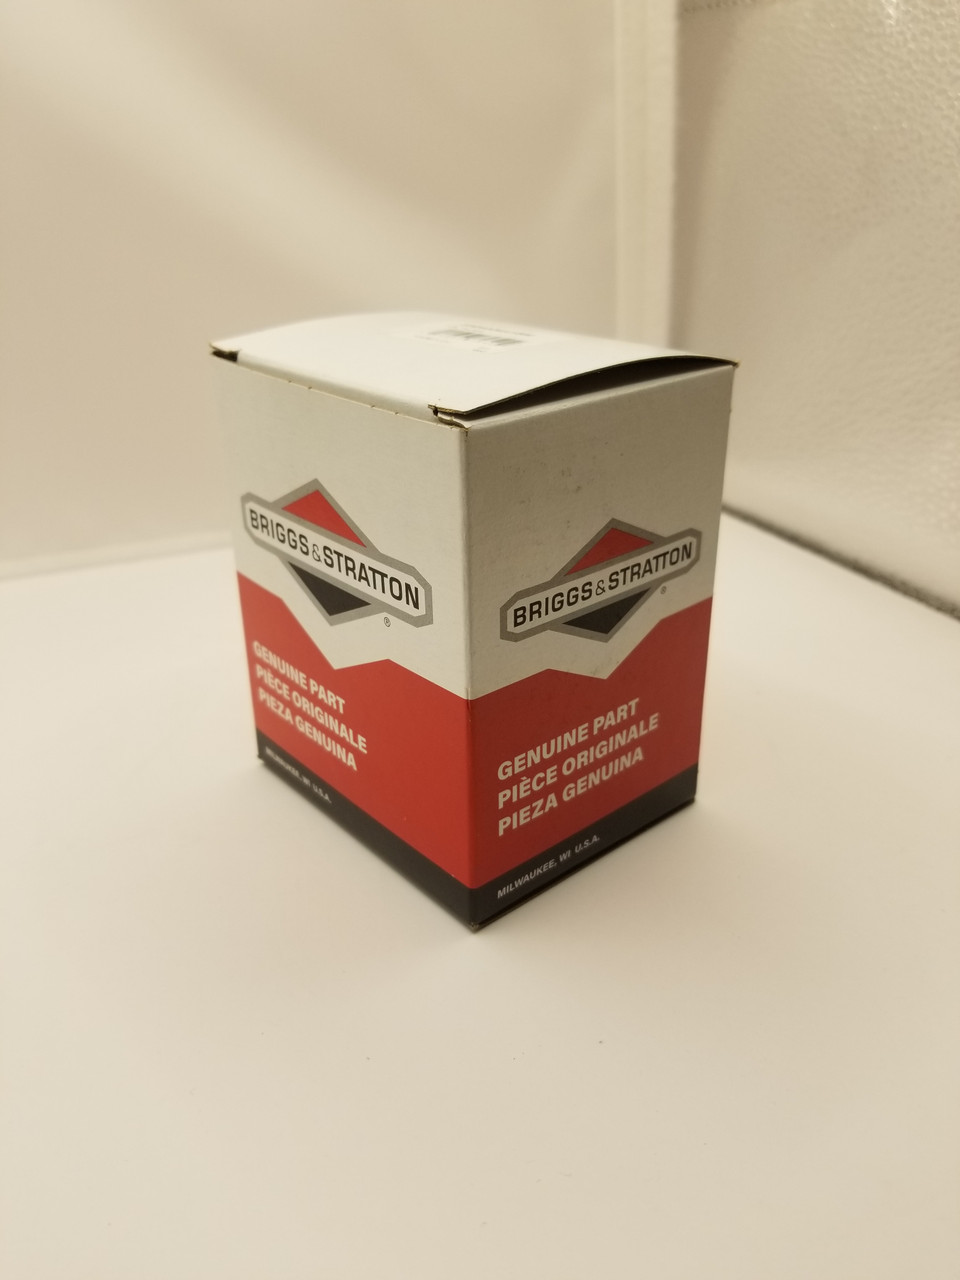 ENGINE PACKED SINGLE CARTON - 49R977-0004-G1 package std